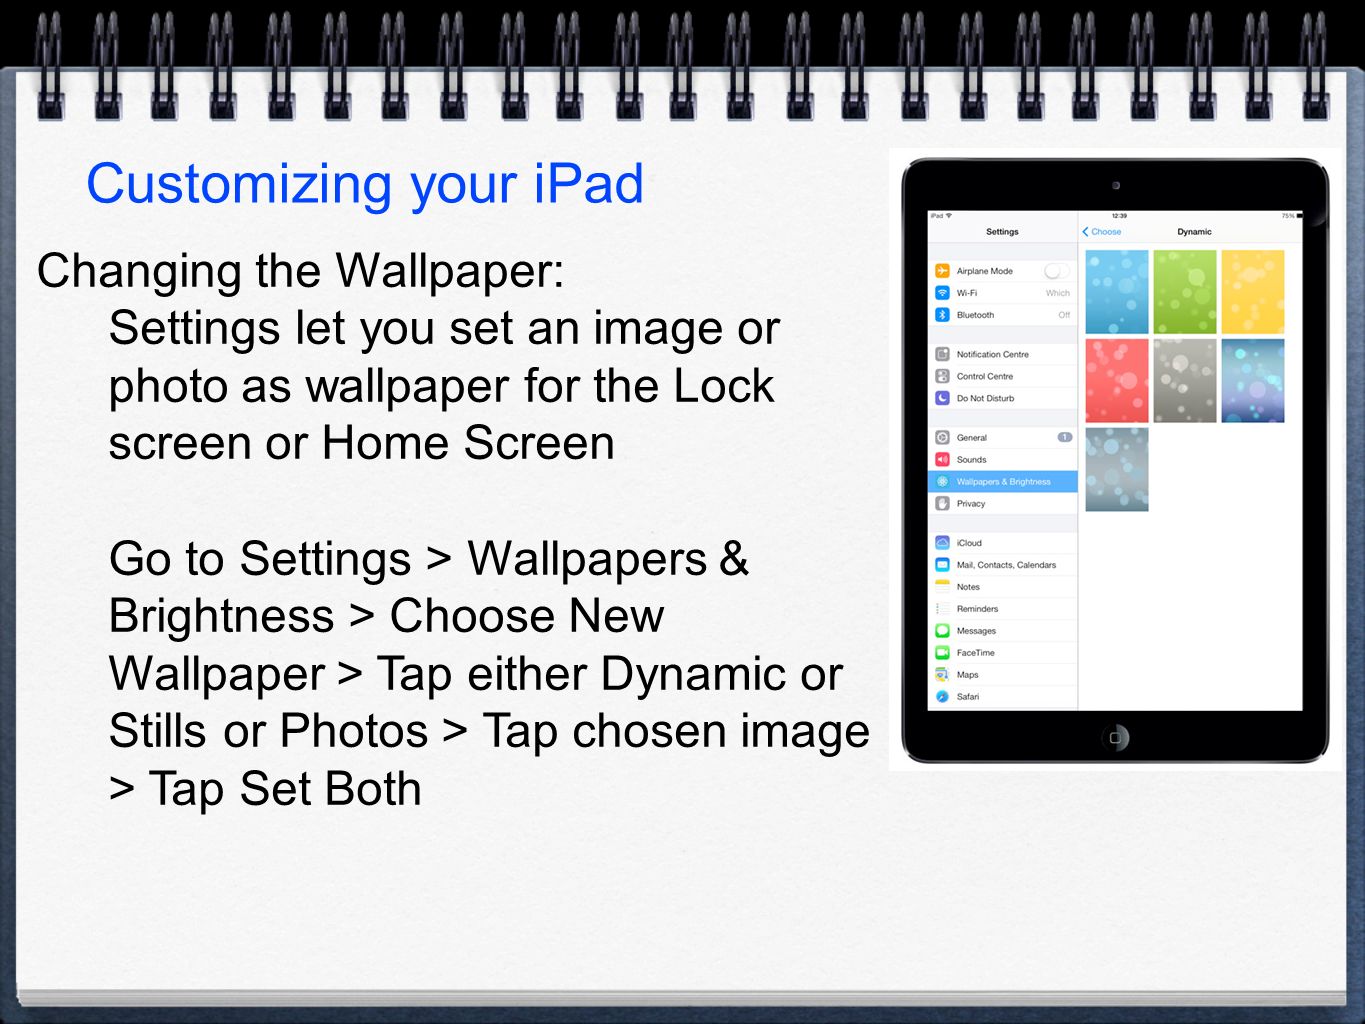 Customizing your iPad Changing the Wallpaper: Settings let you set an image or photo as wallpaper for the Lock screen or Home Screen Go to Settings > Wallpapers & Brightness > Choose New Wallpaper > Tap either Dynamic or Stills or Photos > Tap chosen image > Tap Set Both